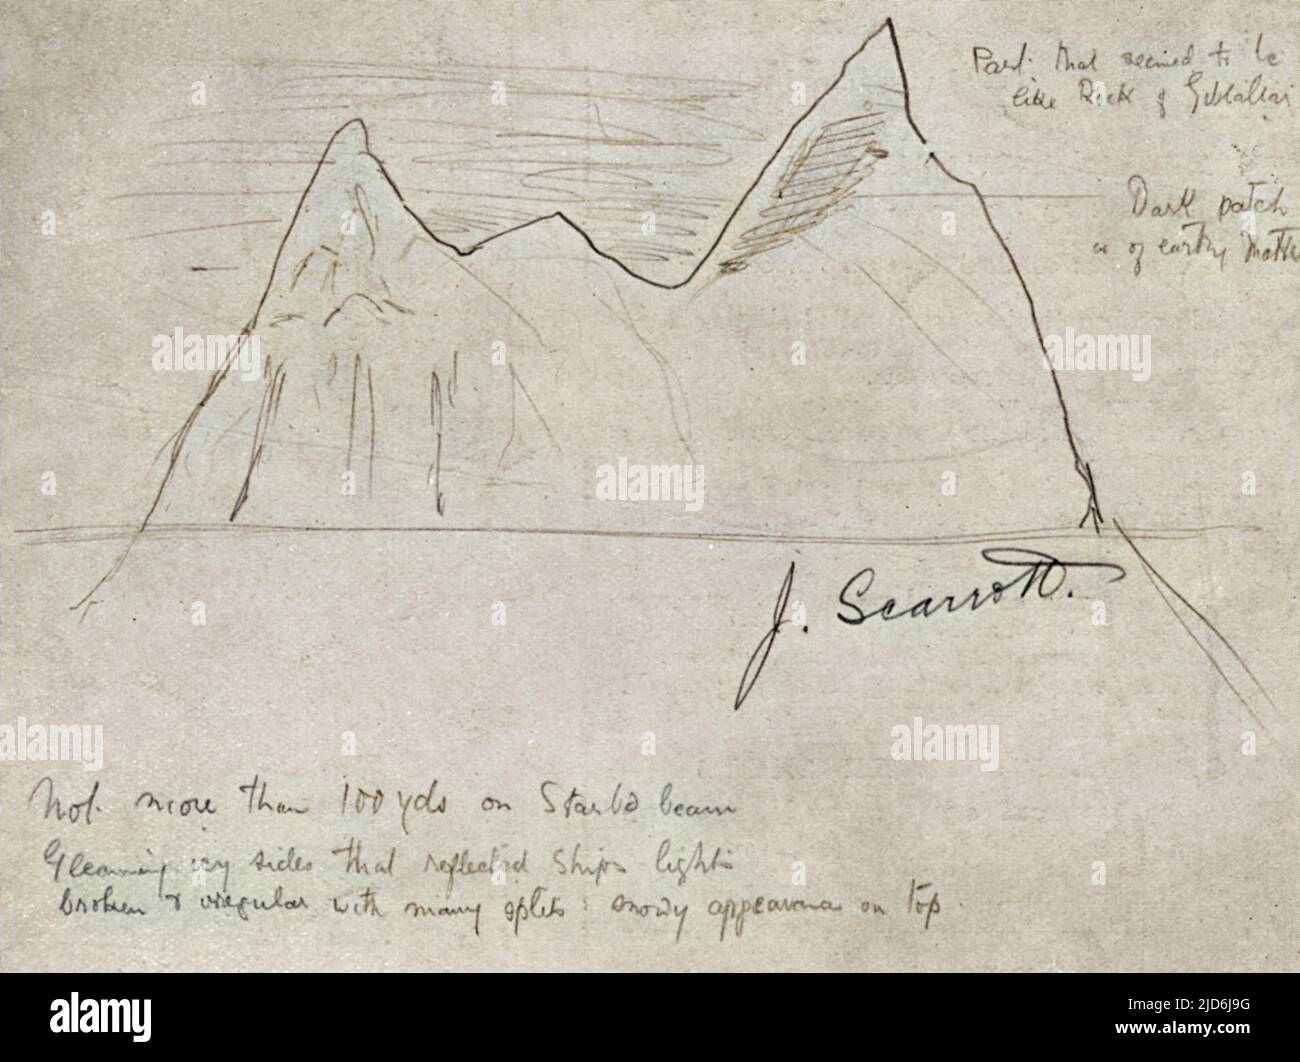 An original sketch of the iceberg's outline, created and signed by J. Scarrott, one of the crew of the Titanic. Colourised version of: 10504345       Date: 1912 Stock Photo